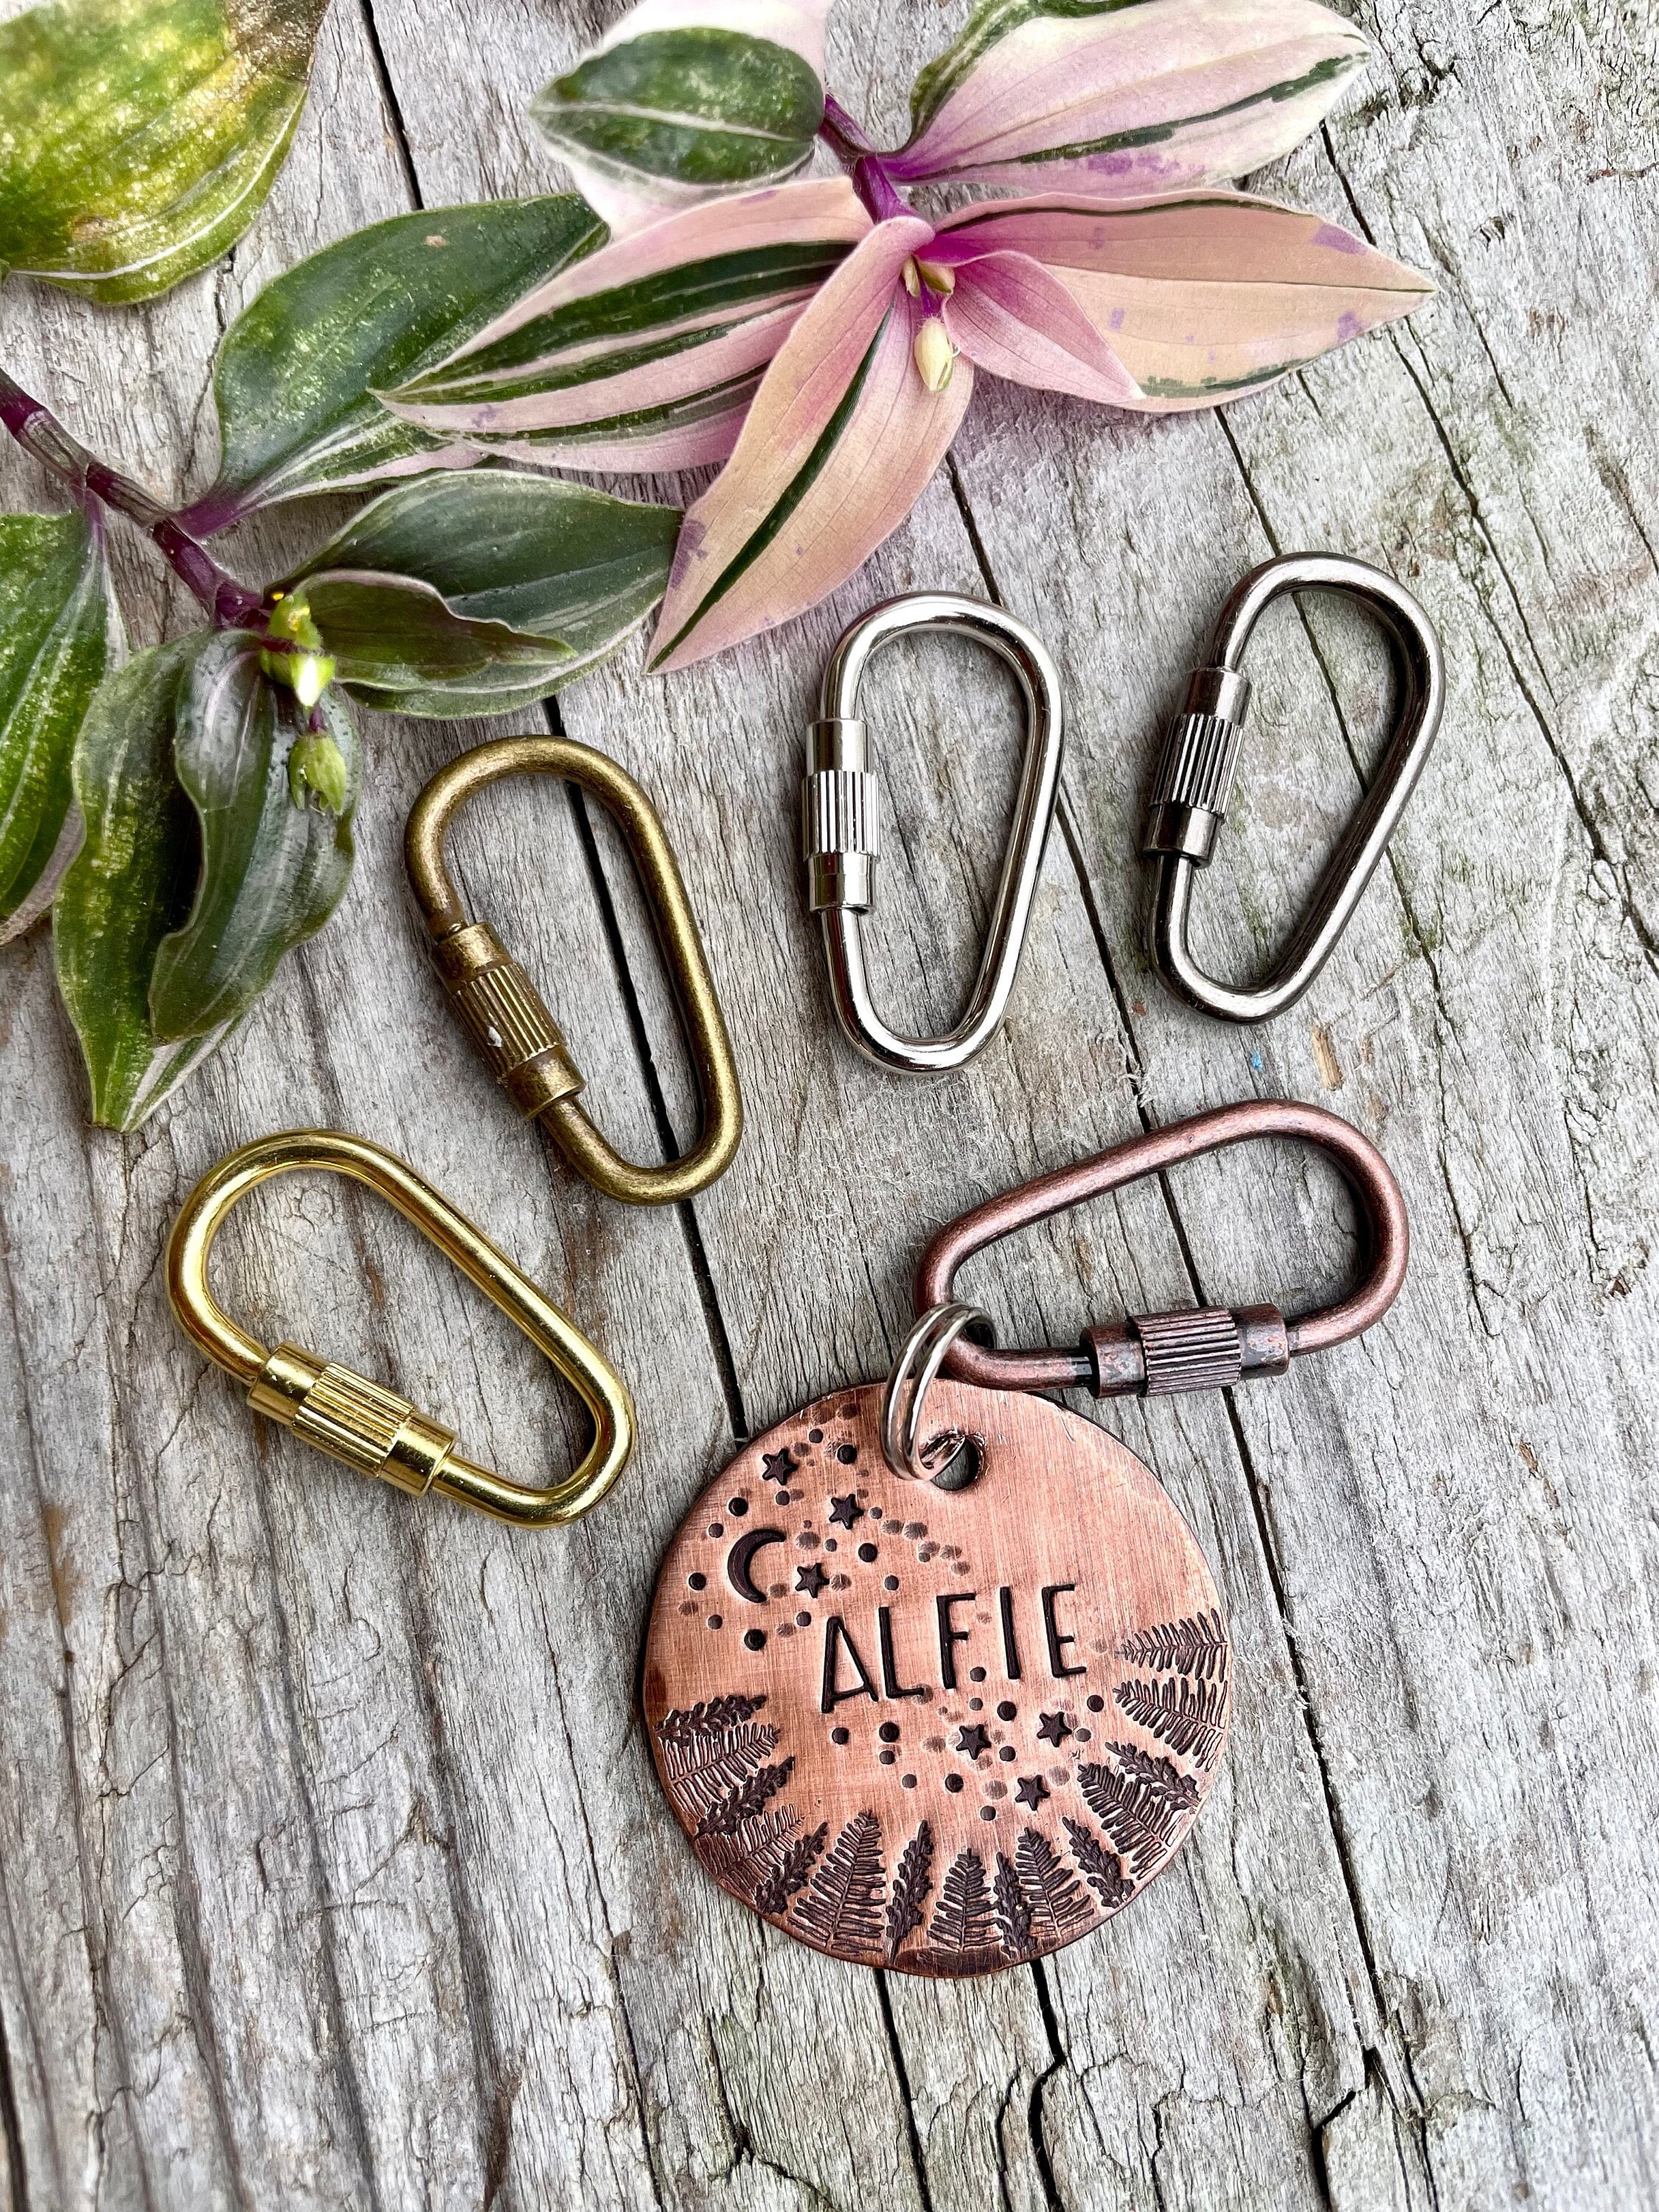 EDC Titanium Keychain, Key Ring, Carabiner, Copper Anodize, Slight Hues Of  Pink